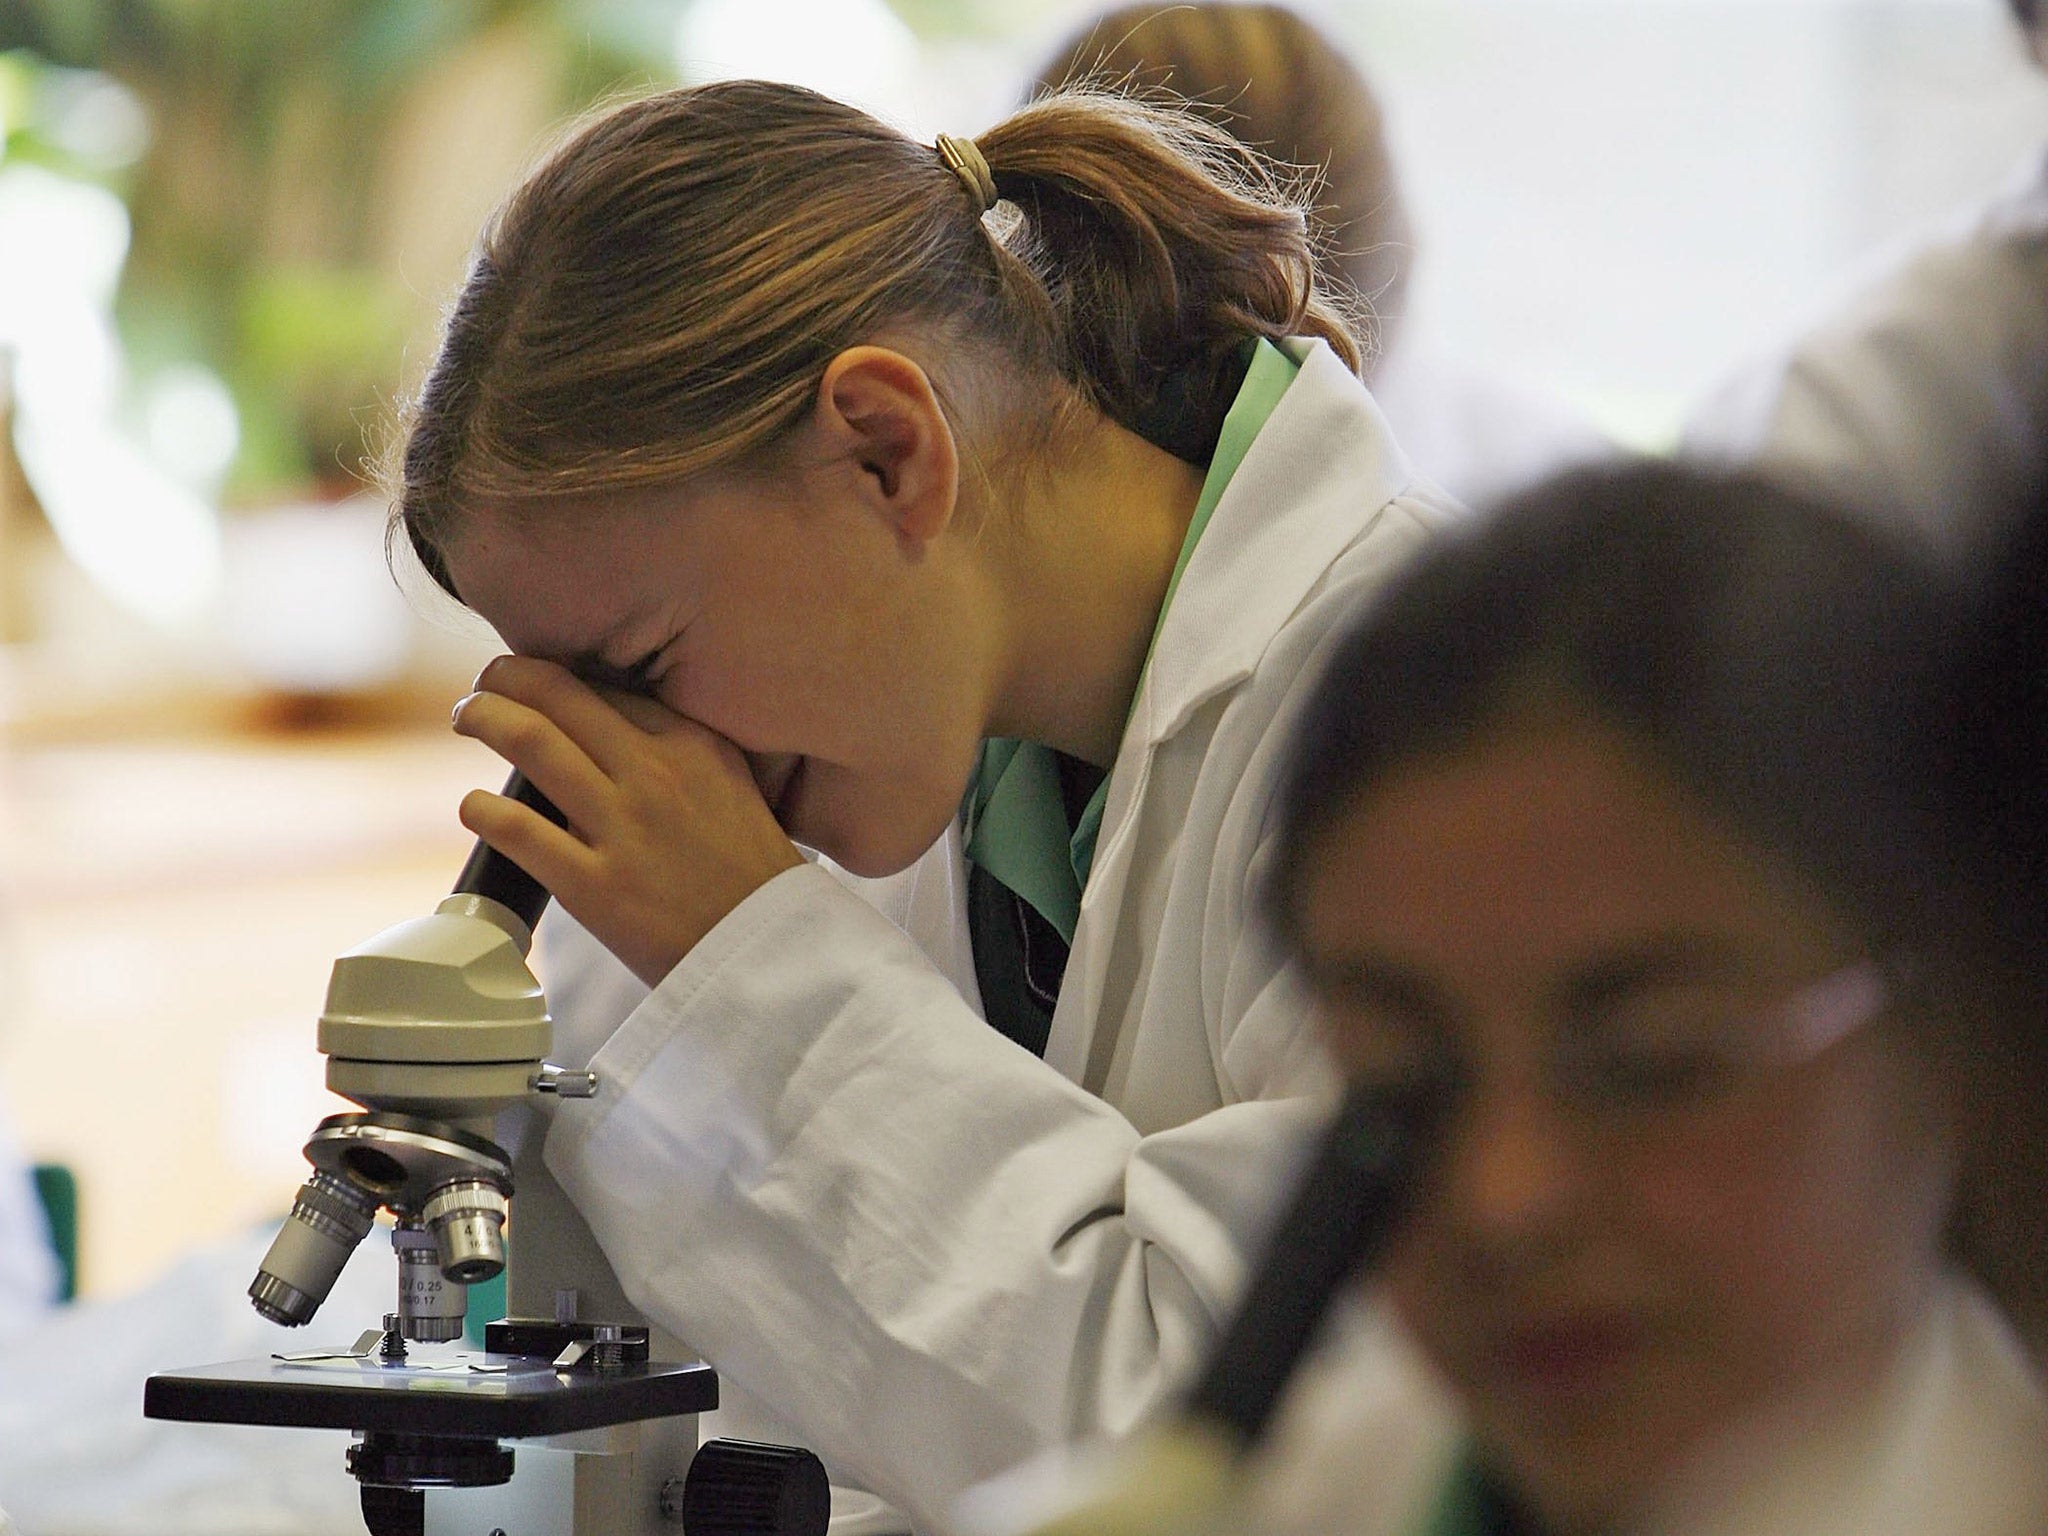 There has been a 27 per cent rise in the number of girls opting for the sciences